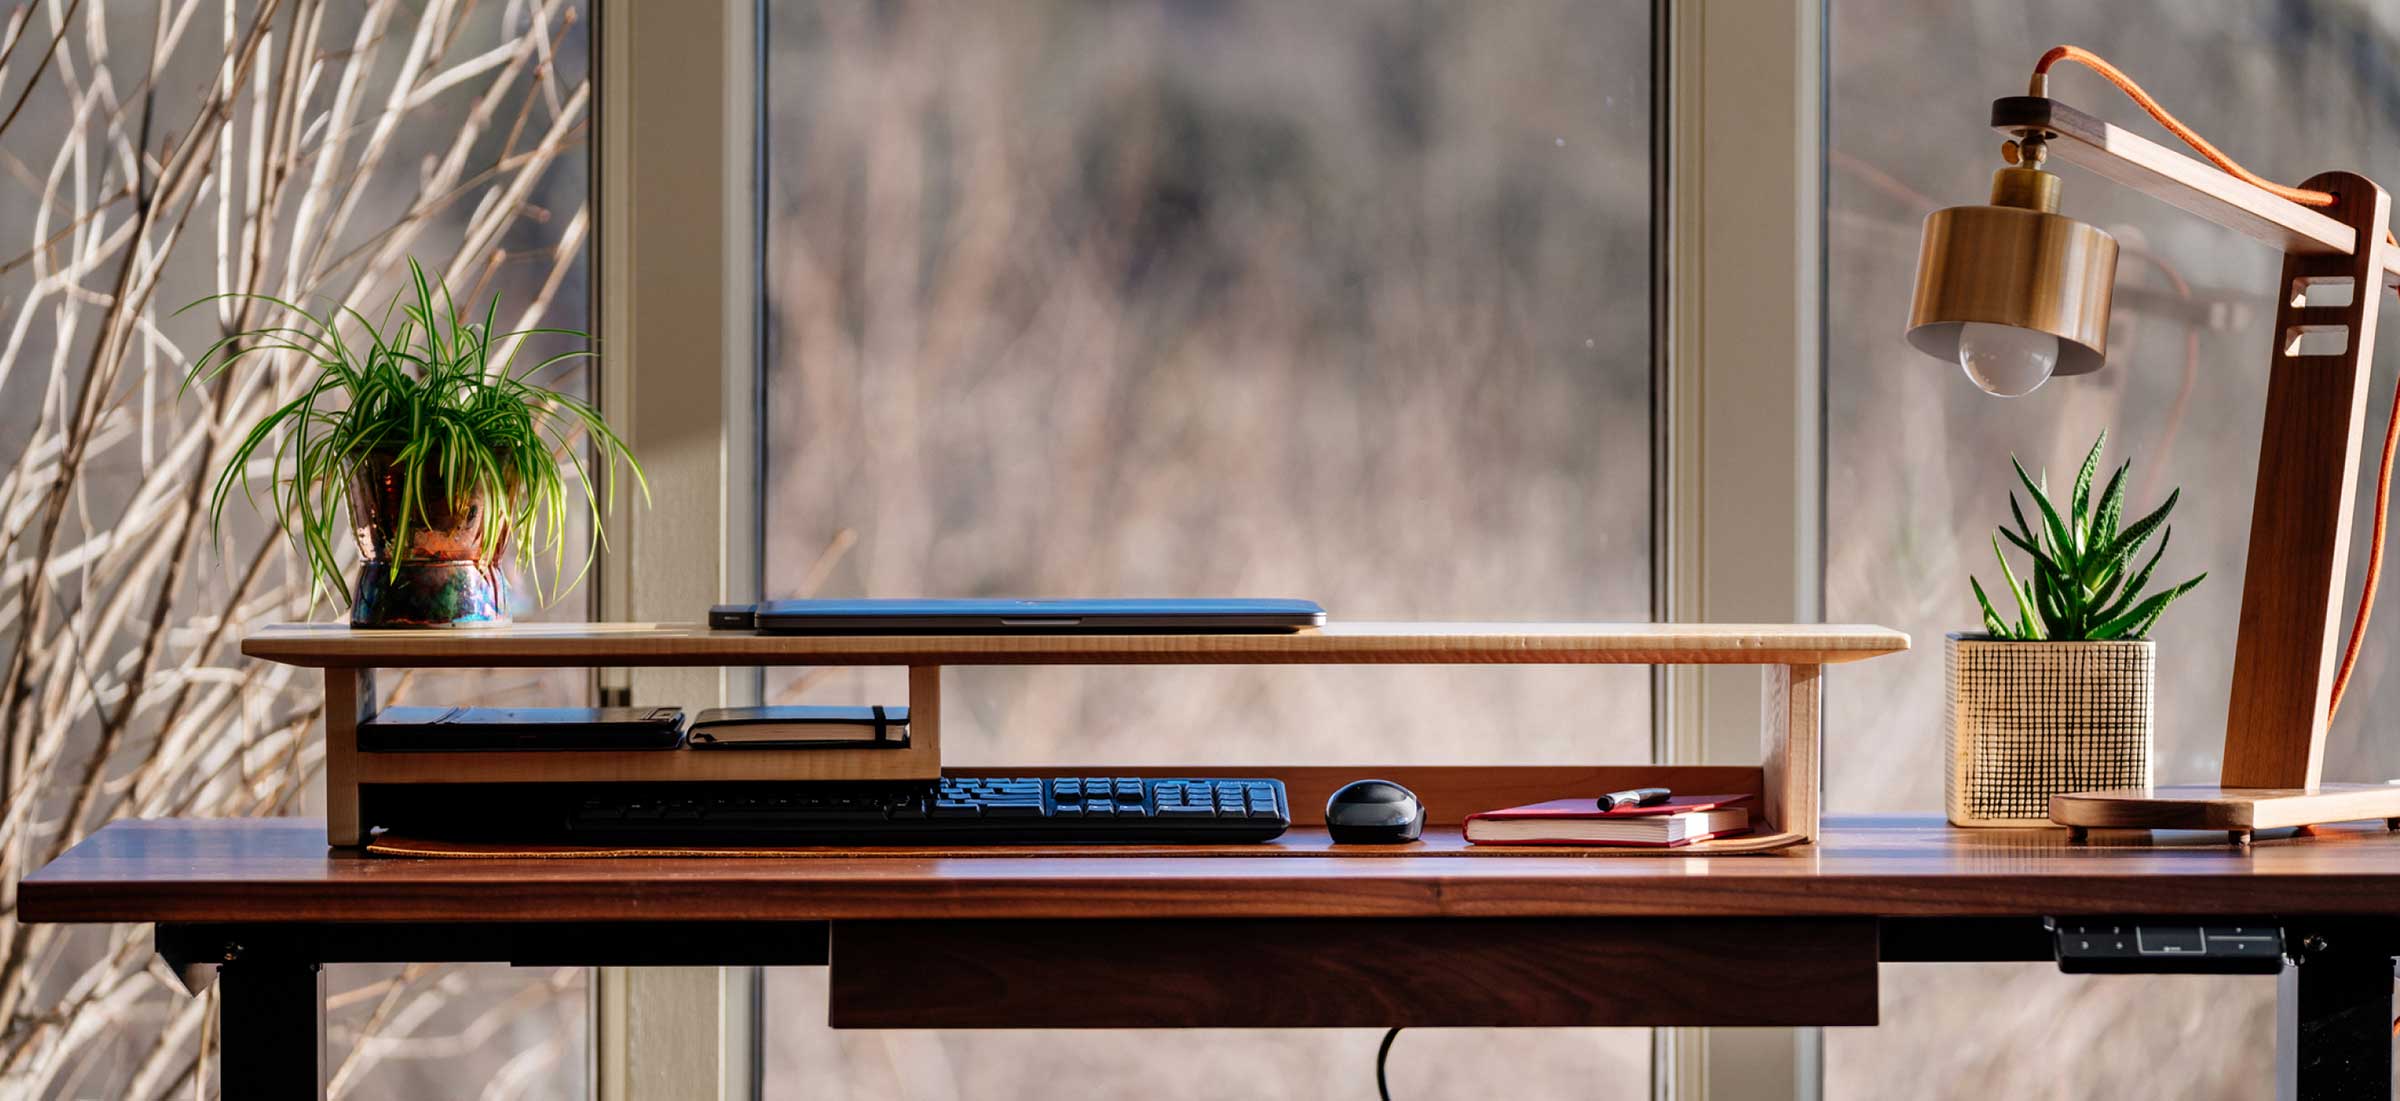 Mt Abraham Desk Shelf on Pompy Standing Desk with cool modern lamp all by Pompanoosuc Mills.